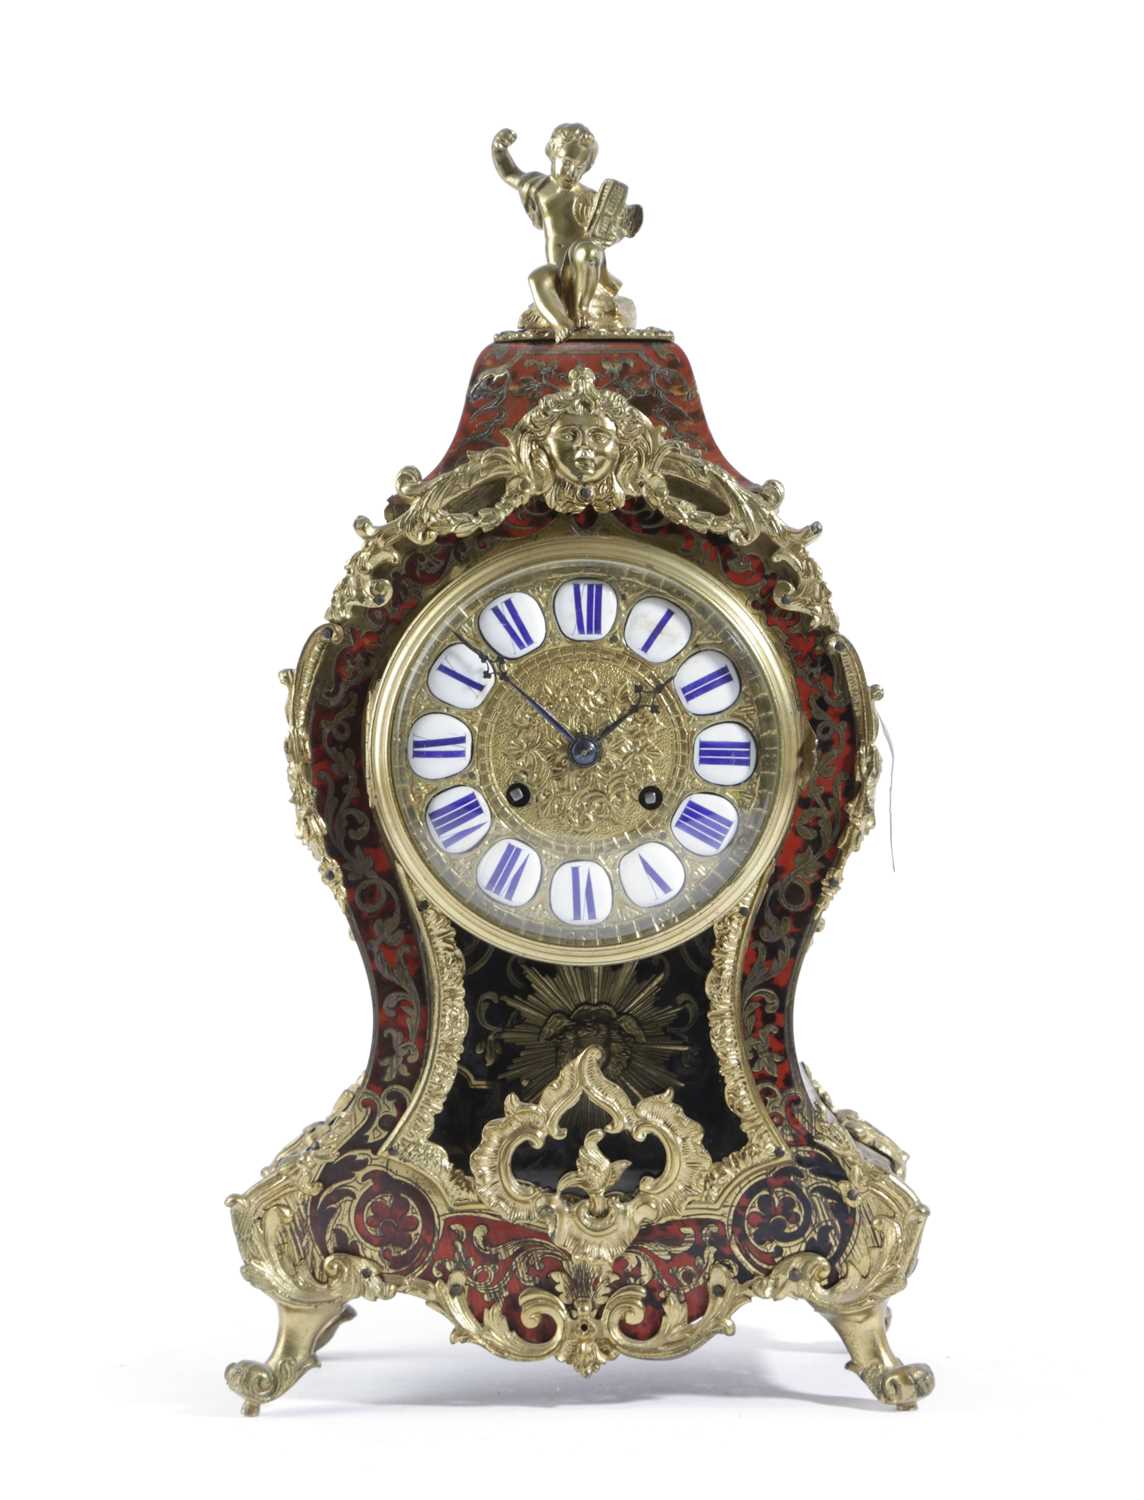 A FRENCH BOULLE MARQUETRY MANTEL CLOCK IN LOUIS XV STYLE, LATE 19TH CENTURY the brass eight day